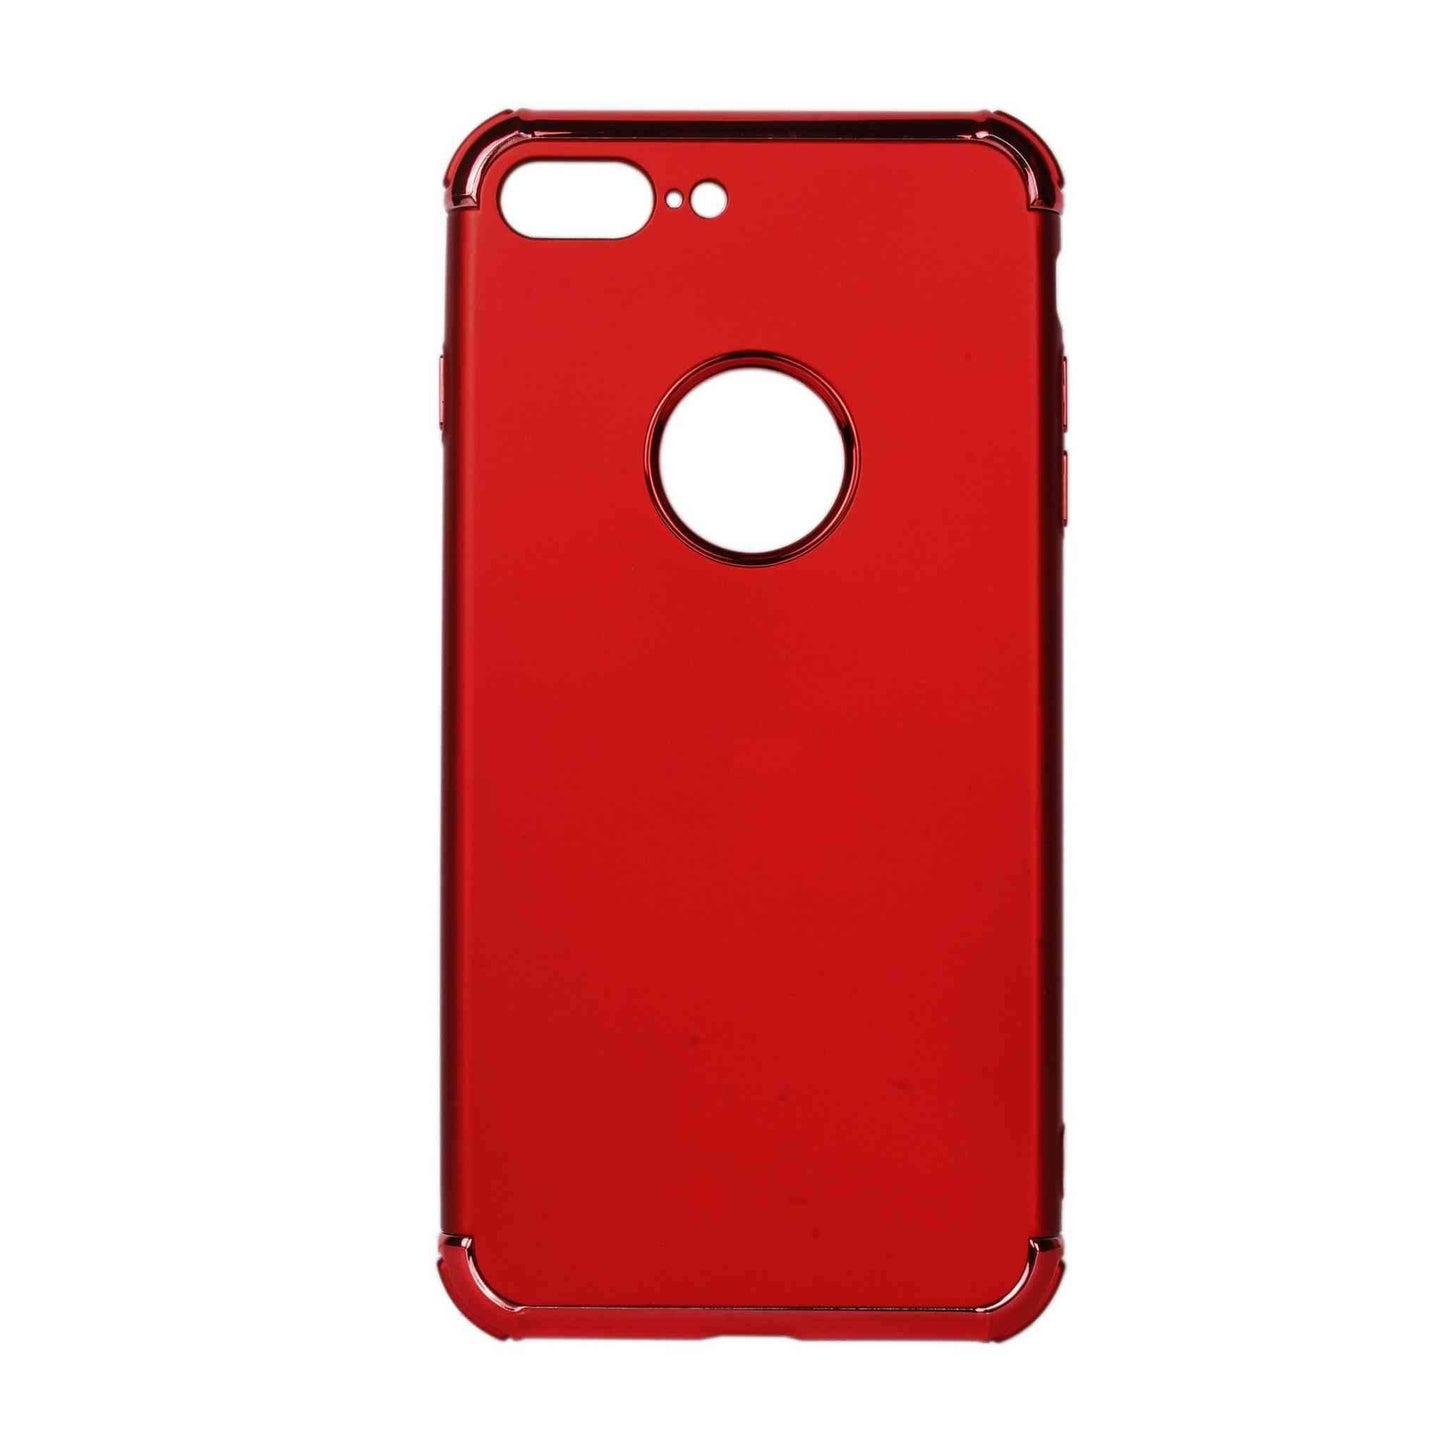 Indian Petals Polycarbonate Electro-plated Shock-proof Anti-scratch Protective Mobile Back Case Cover for Apple iPhone 7 Plus, Red - Indian Petals